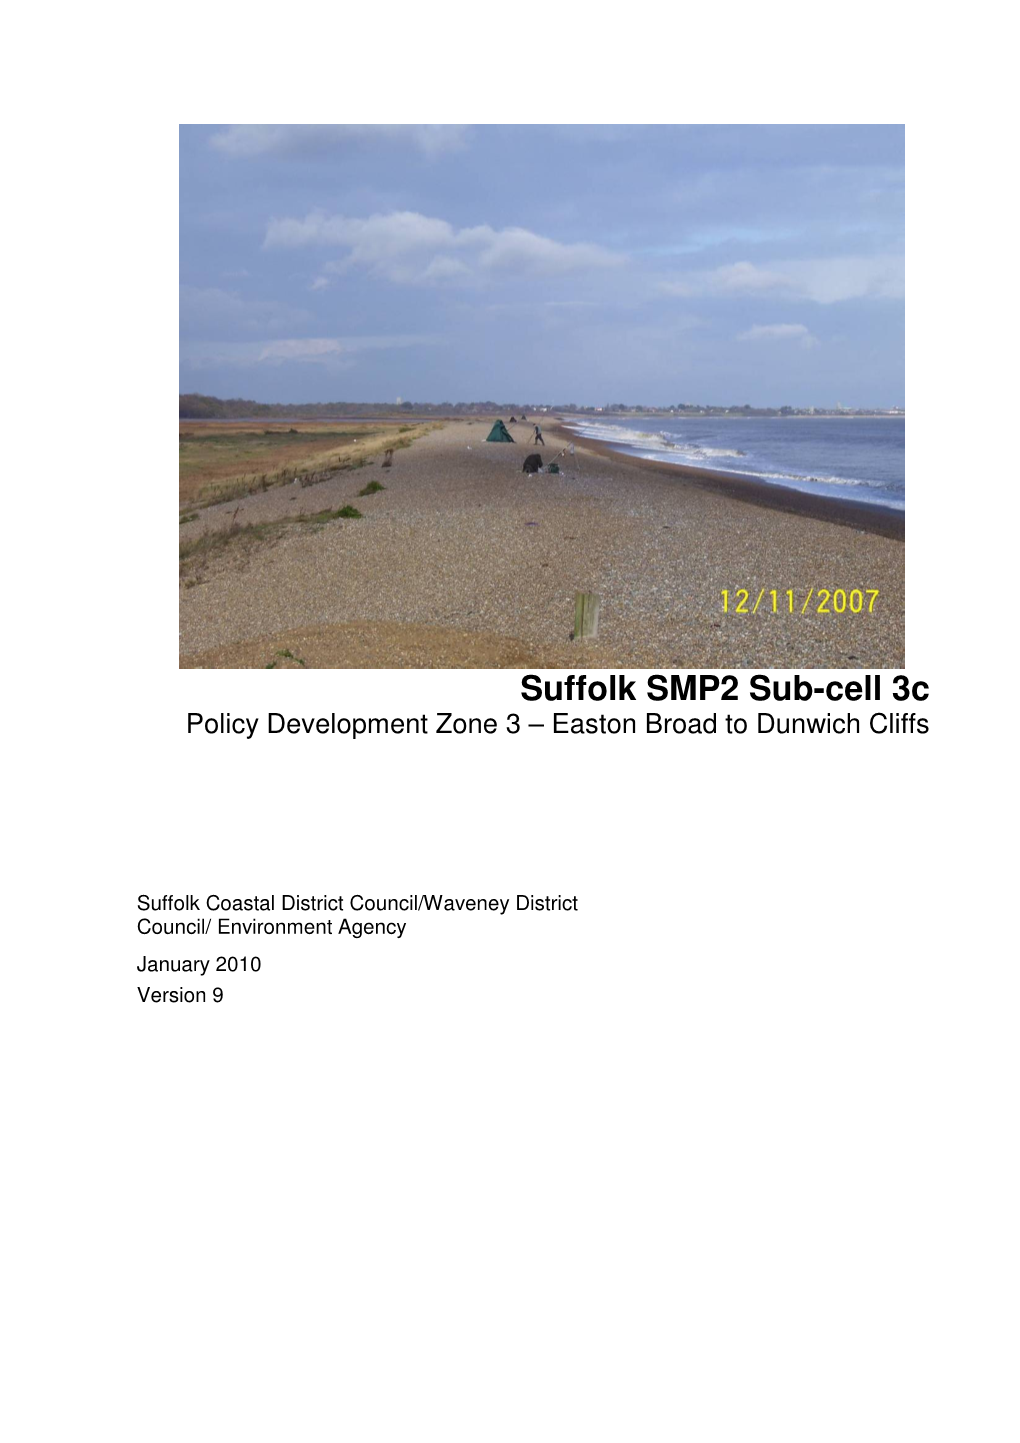 Suffolk SMP2 Sub-Cell 3C Policy Development Zone 3 – Easton Broad to Dunwich Cliffs